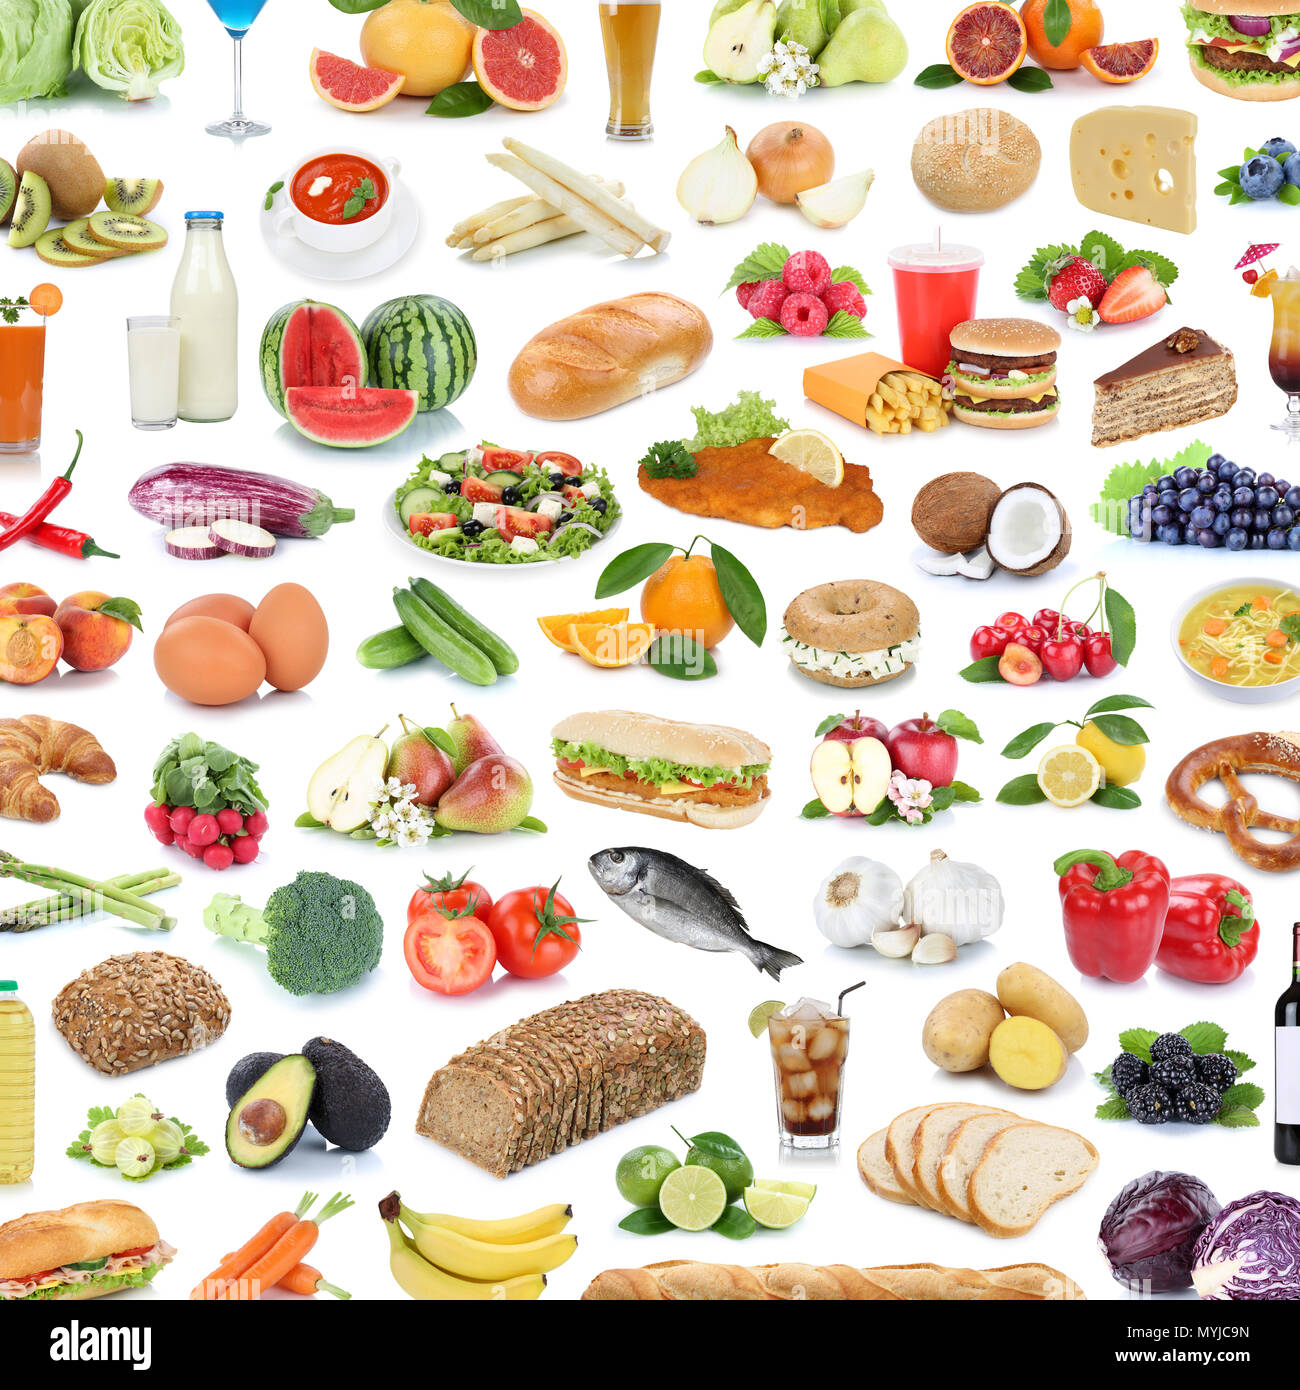 Collection of food and drink background collage healthy eating fruits vegetables square fruit drinks isolated on a white background Stock Photo